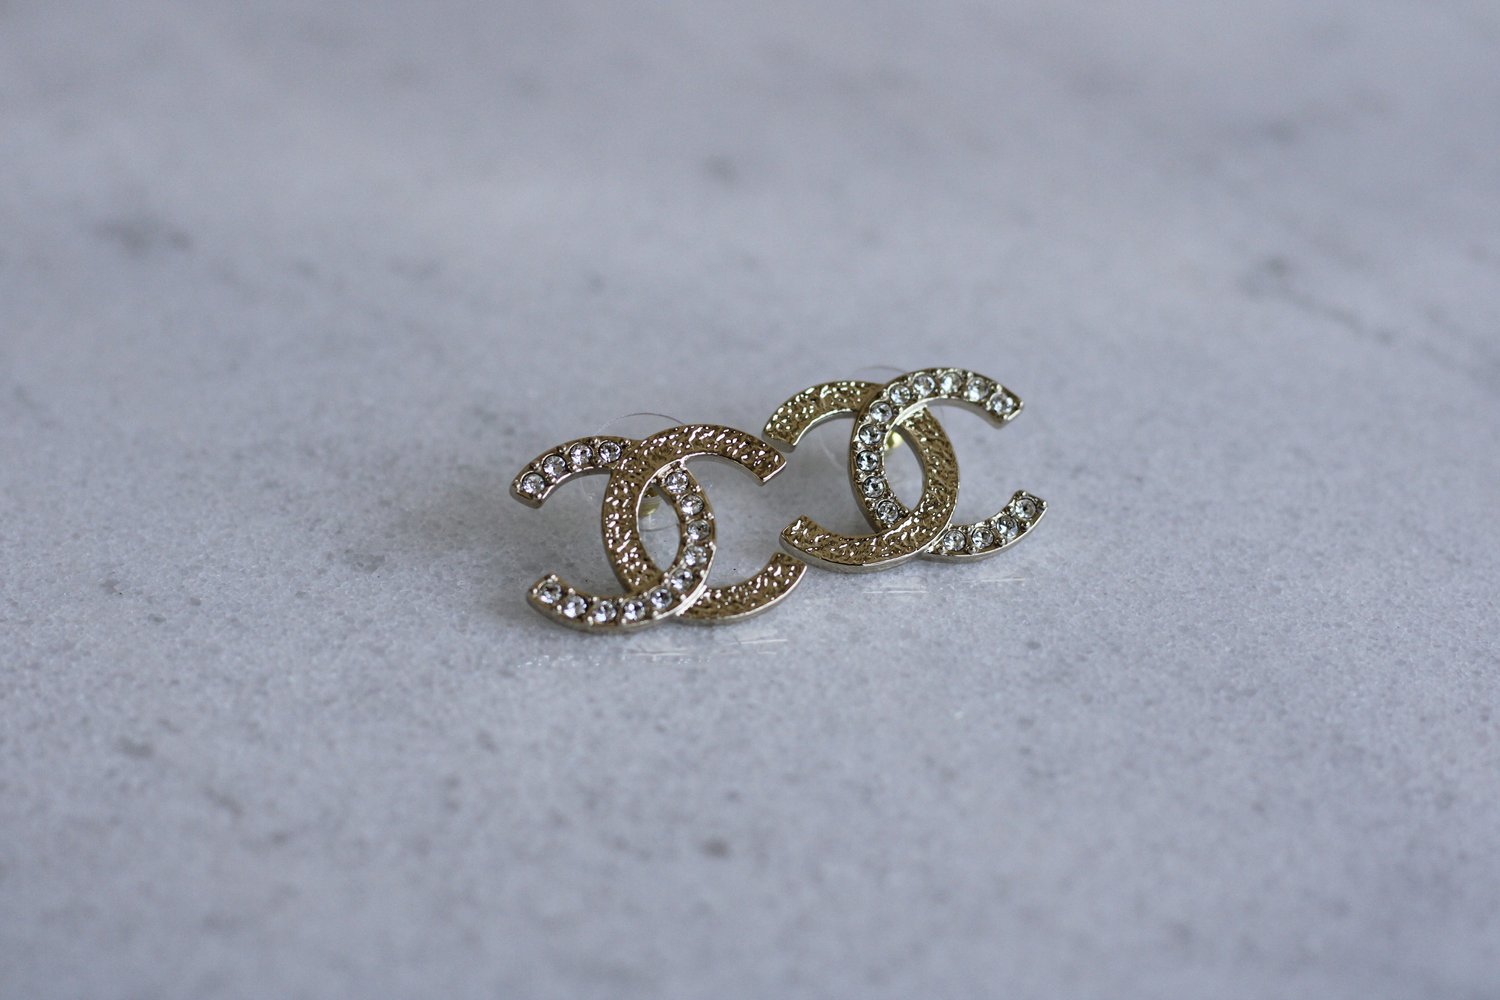 BNIB Chanel 23P Square Earrings with CC logo Silver hardware